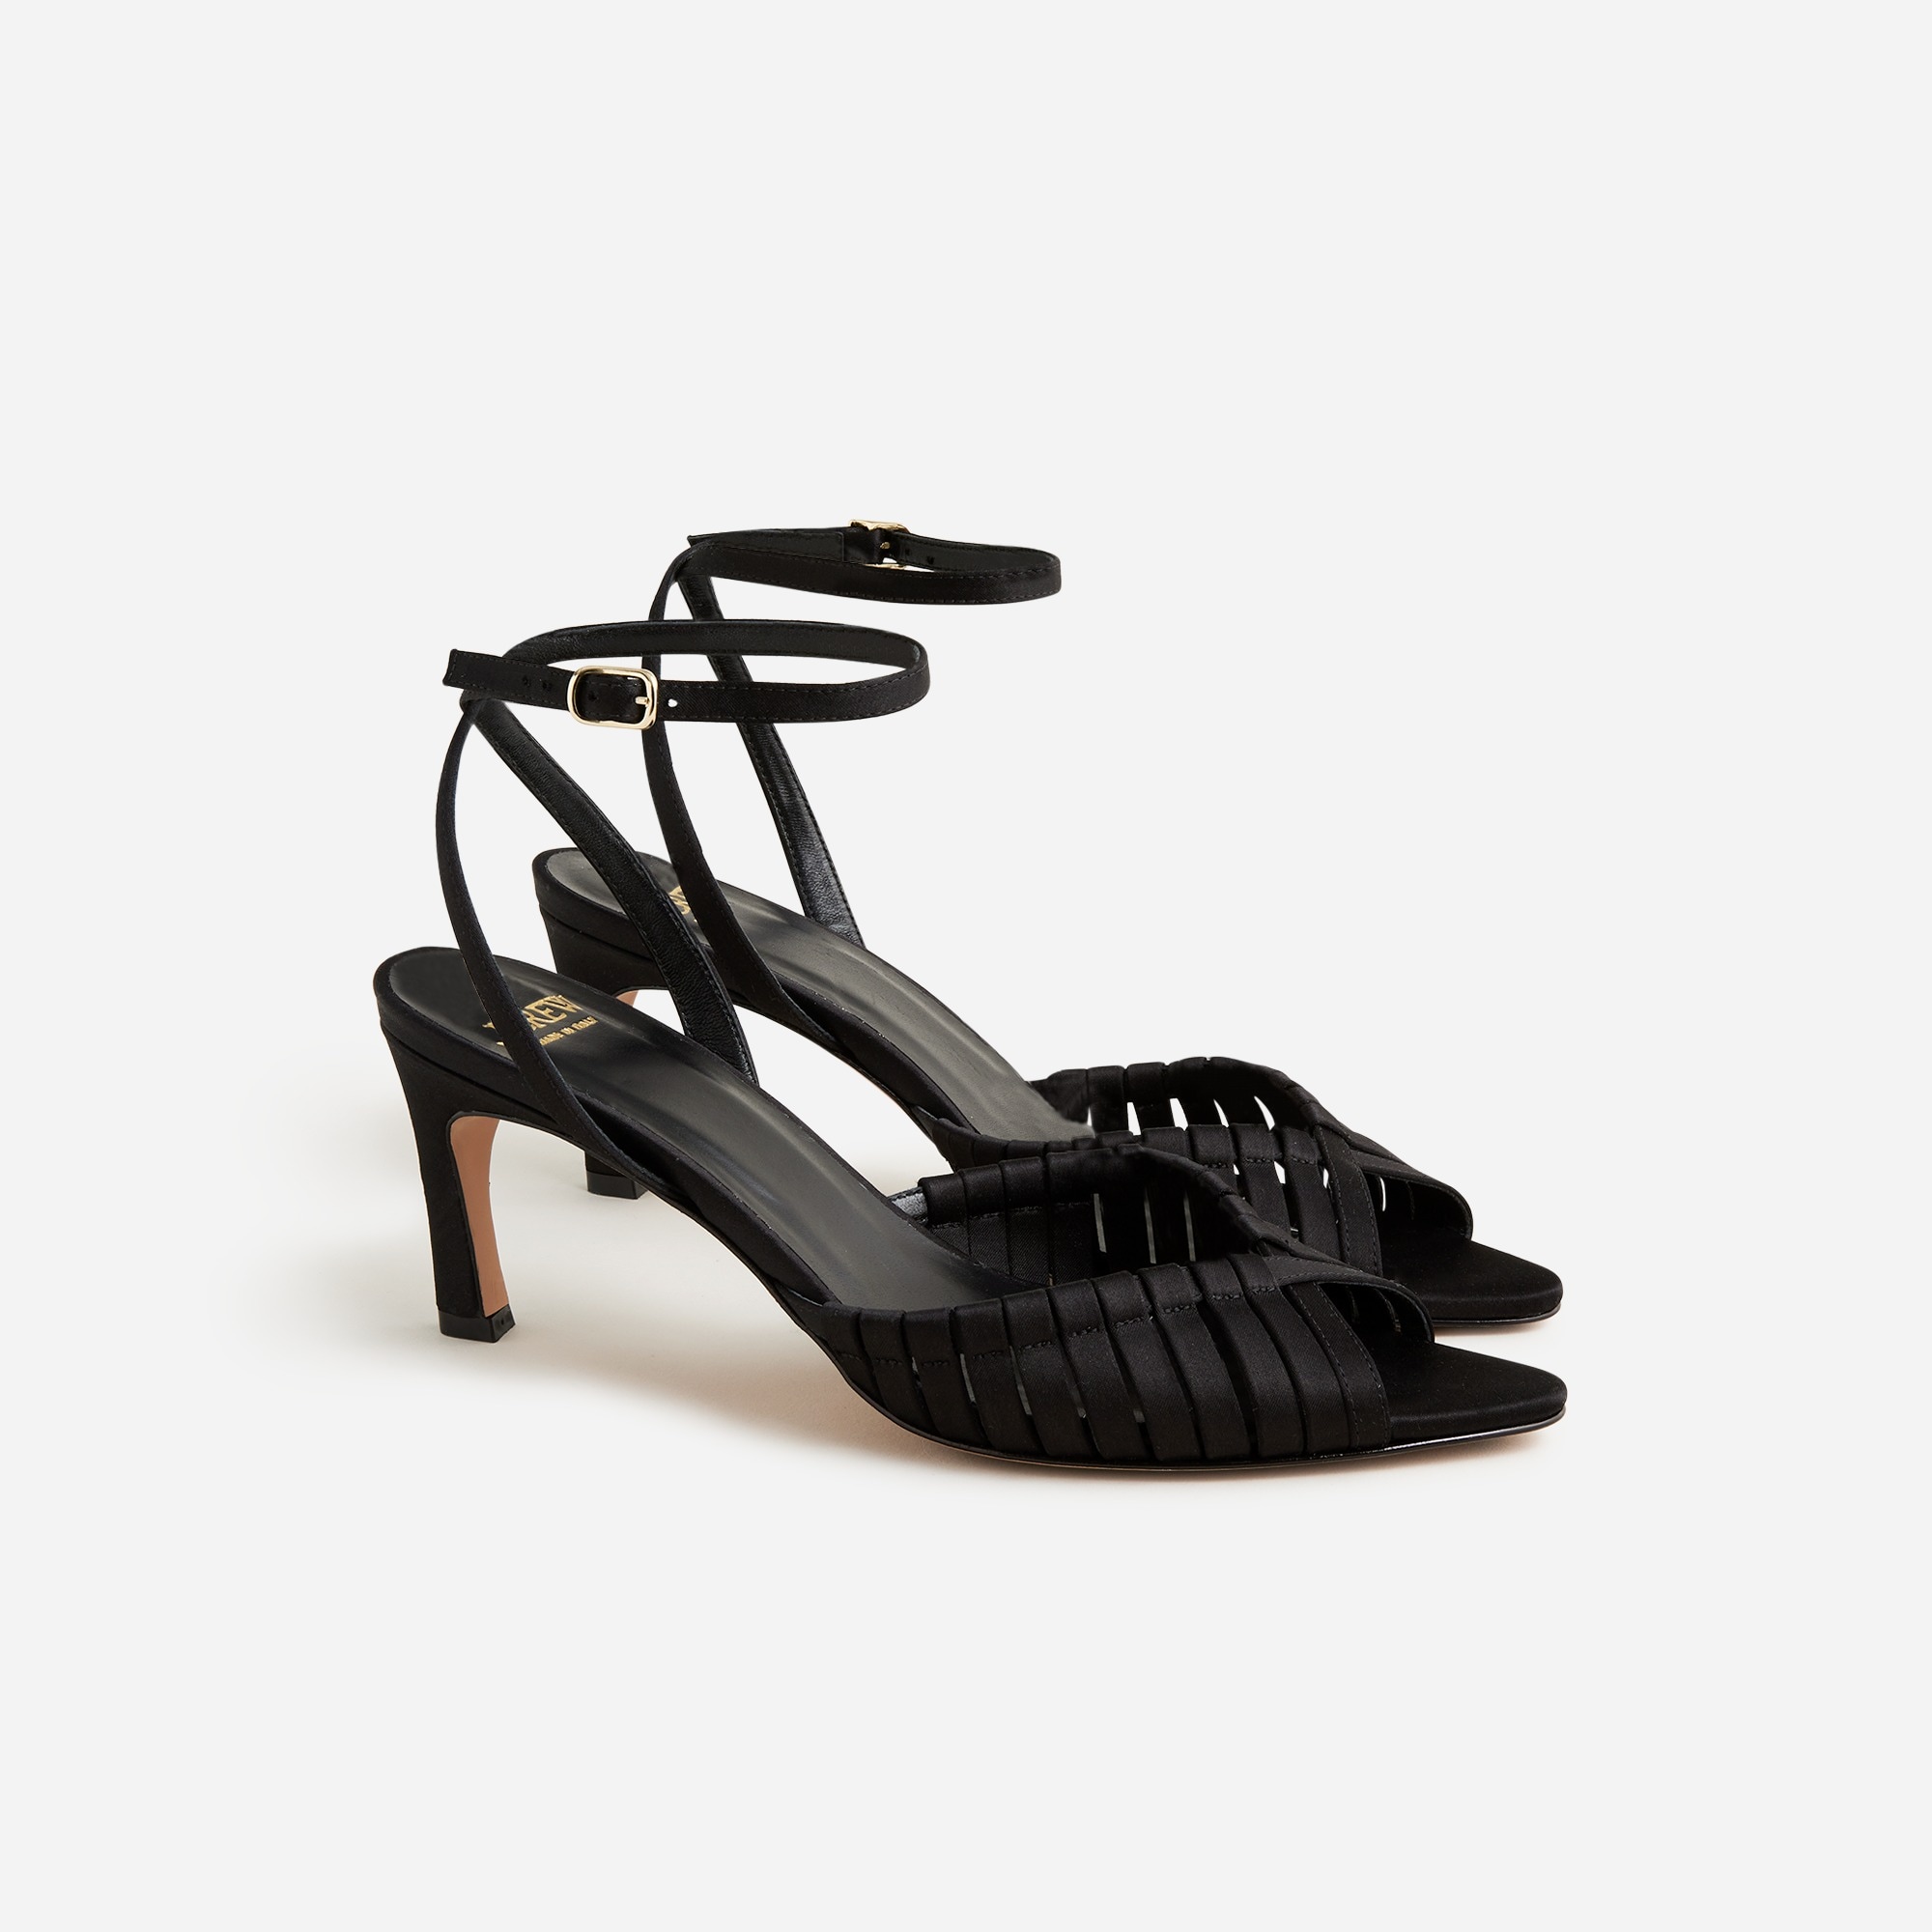 Jcrew Made-in-Italy curved-heel sandals in satin